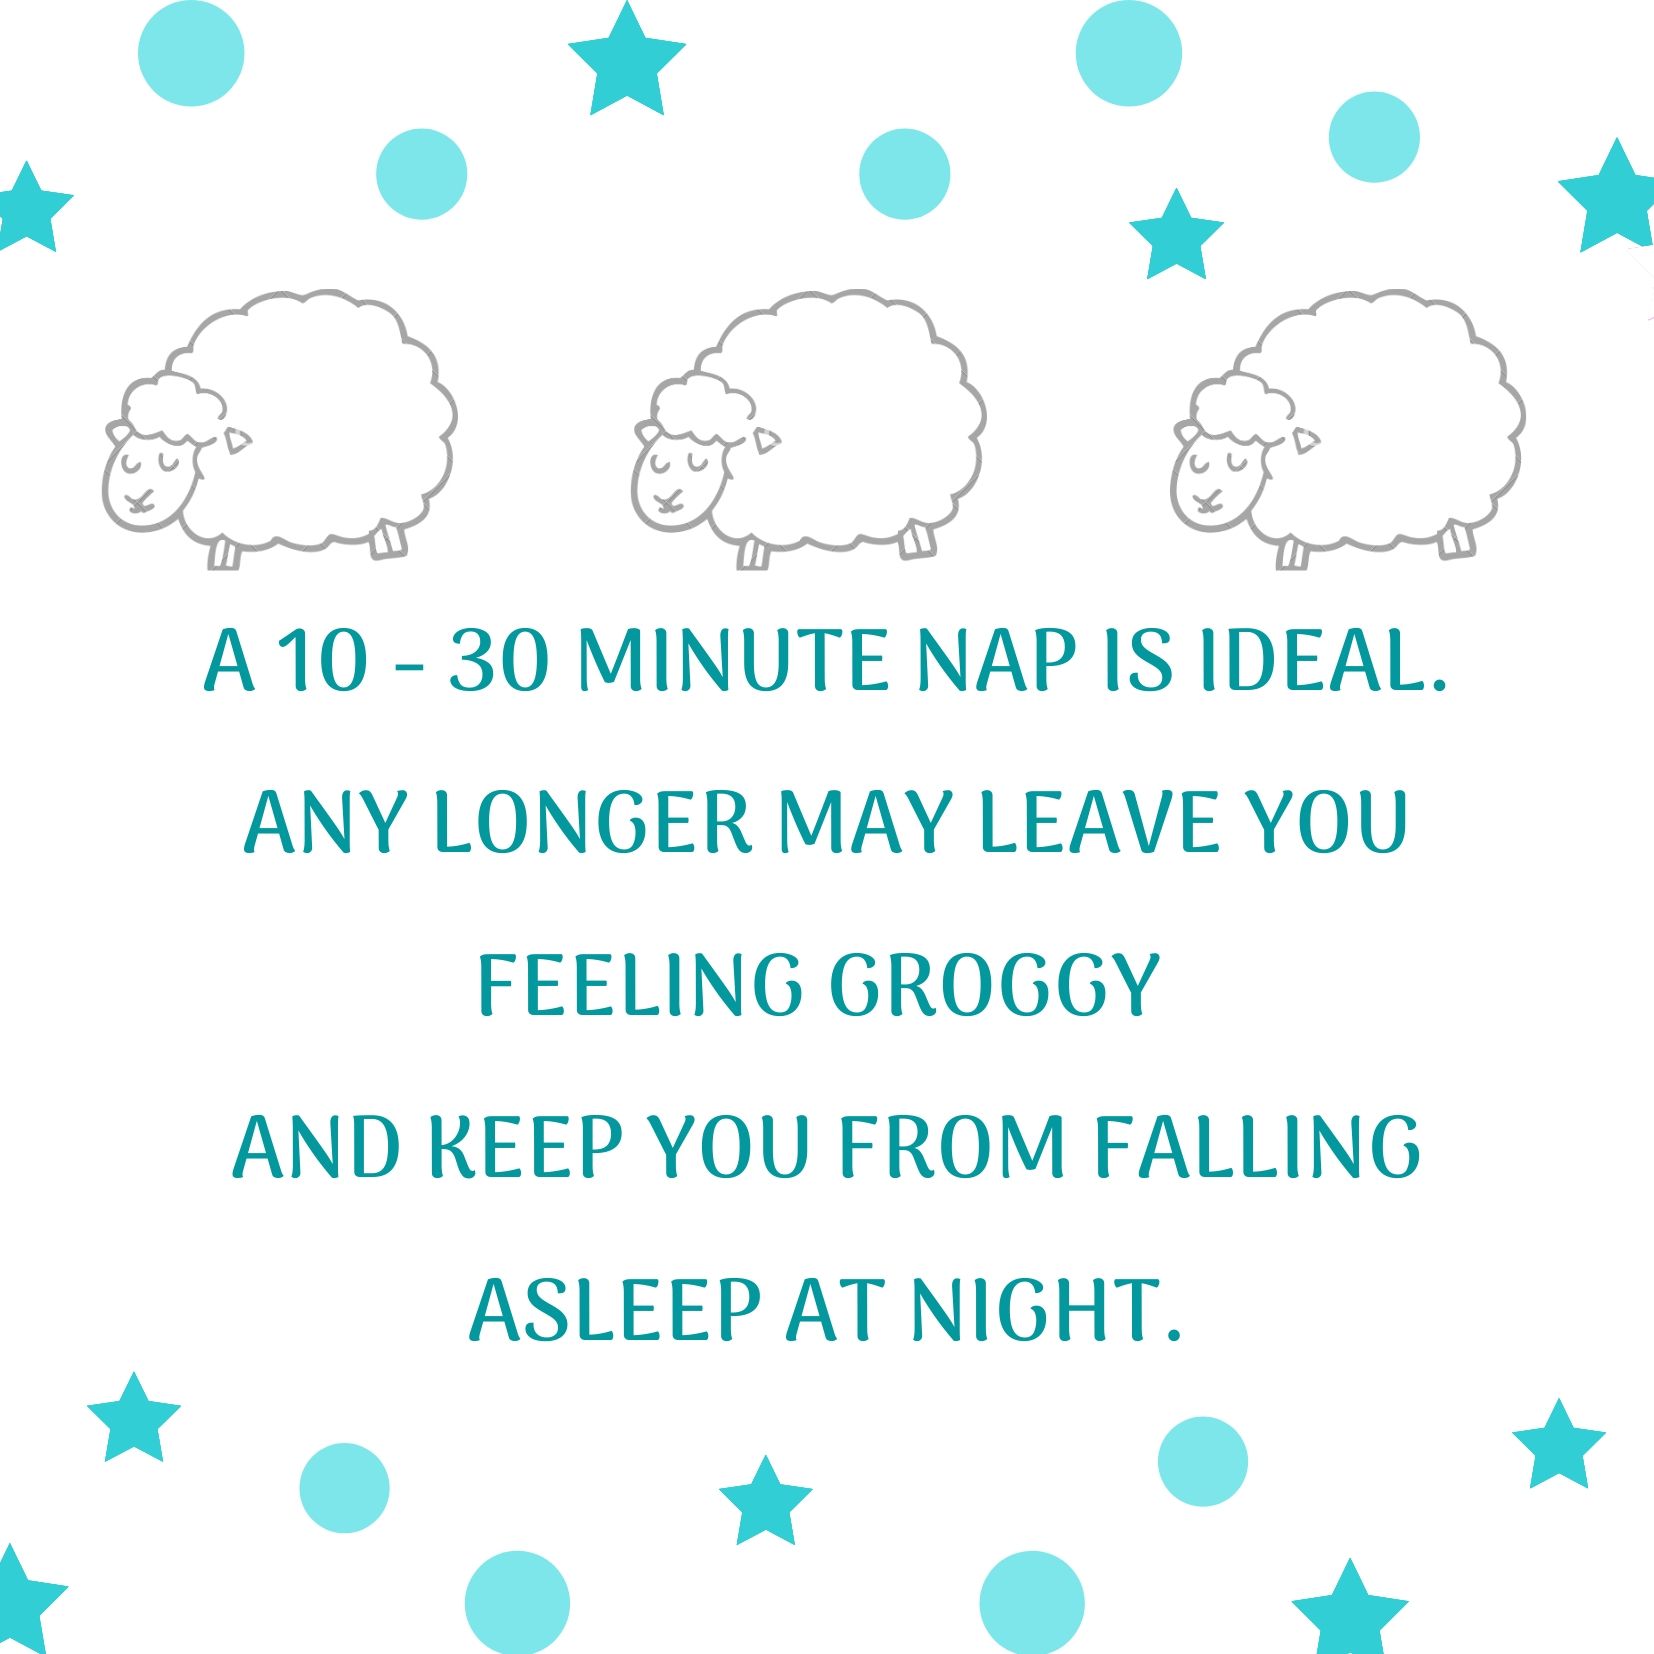 A 10 to 30 minute nap is ideal. Any longer can leave you feeling groggy and keep you up at night